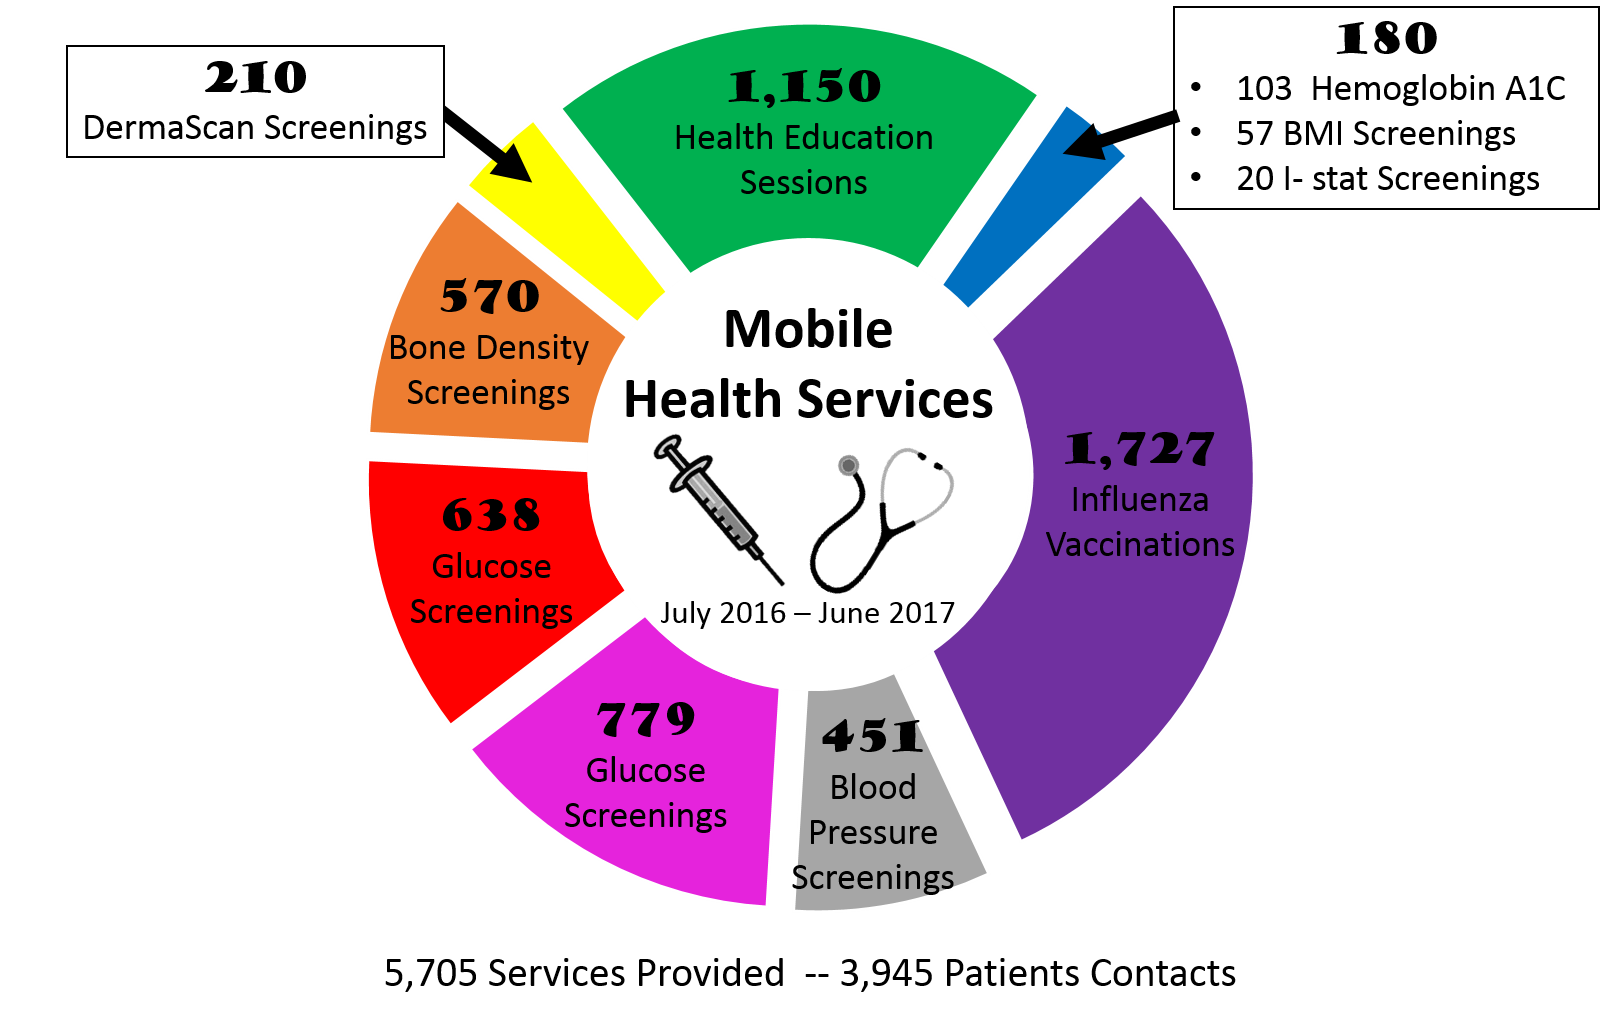 health services